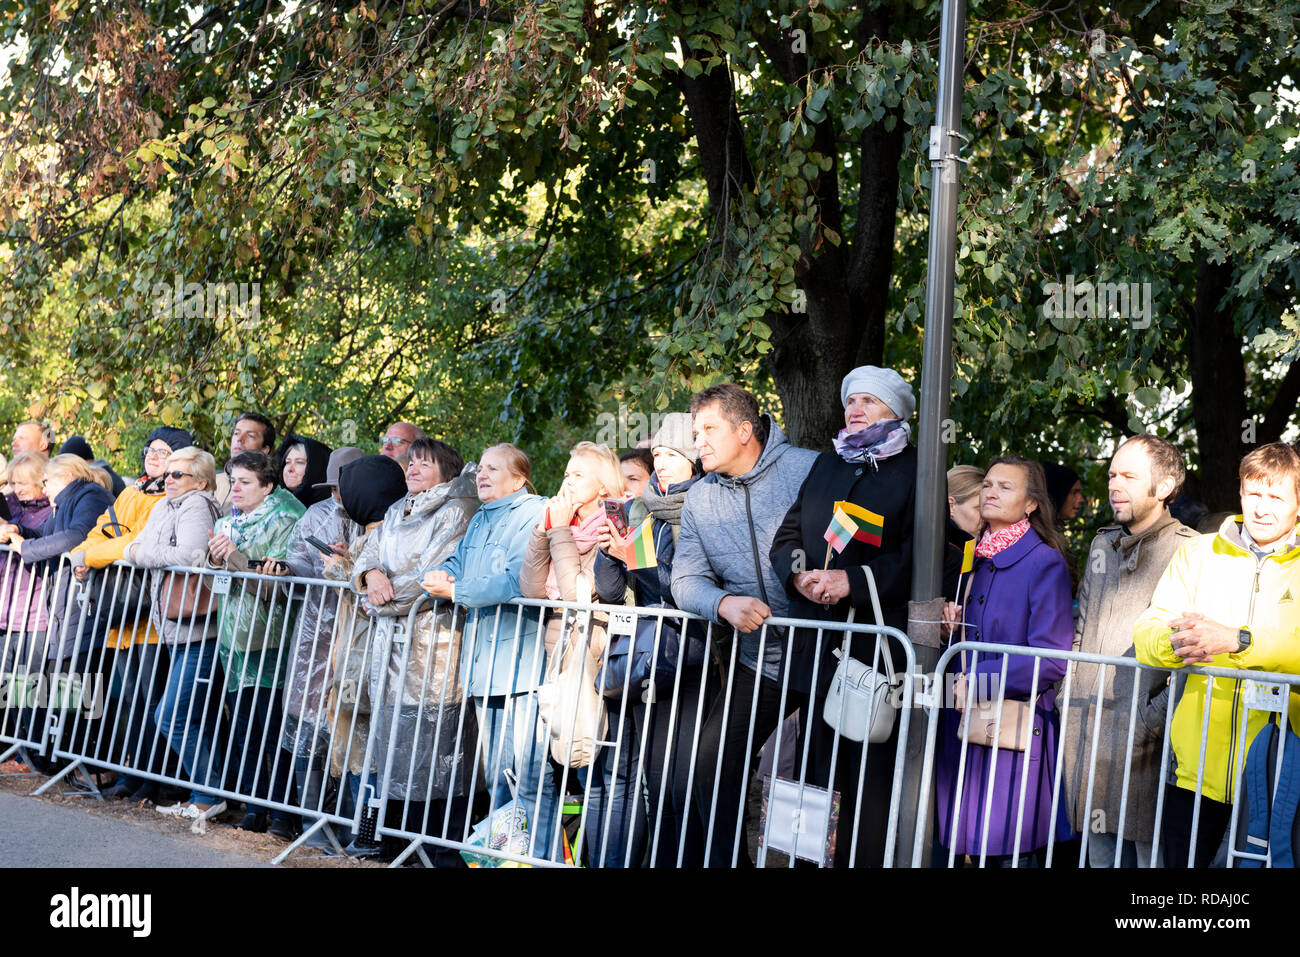 The crowd of people standing behind the fence during the Pope Francis visit to Lithuania at the Santakos Park in Kaunas, Lithuania Stock Photo